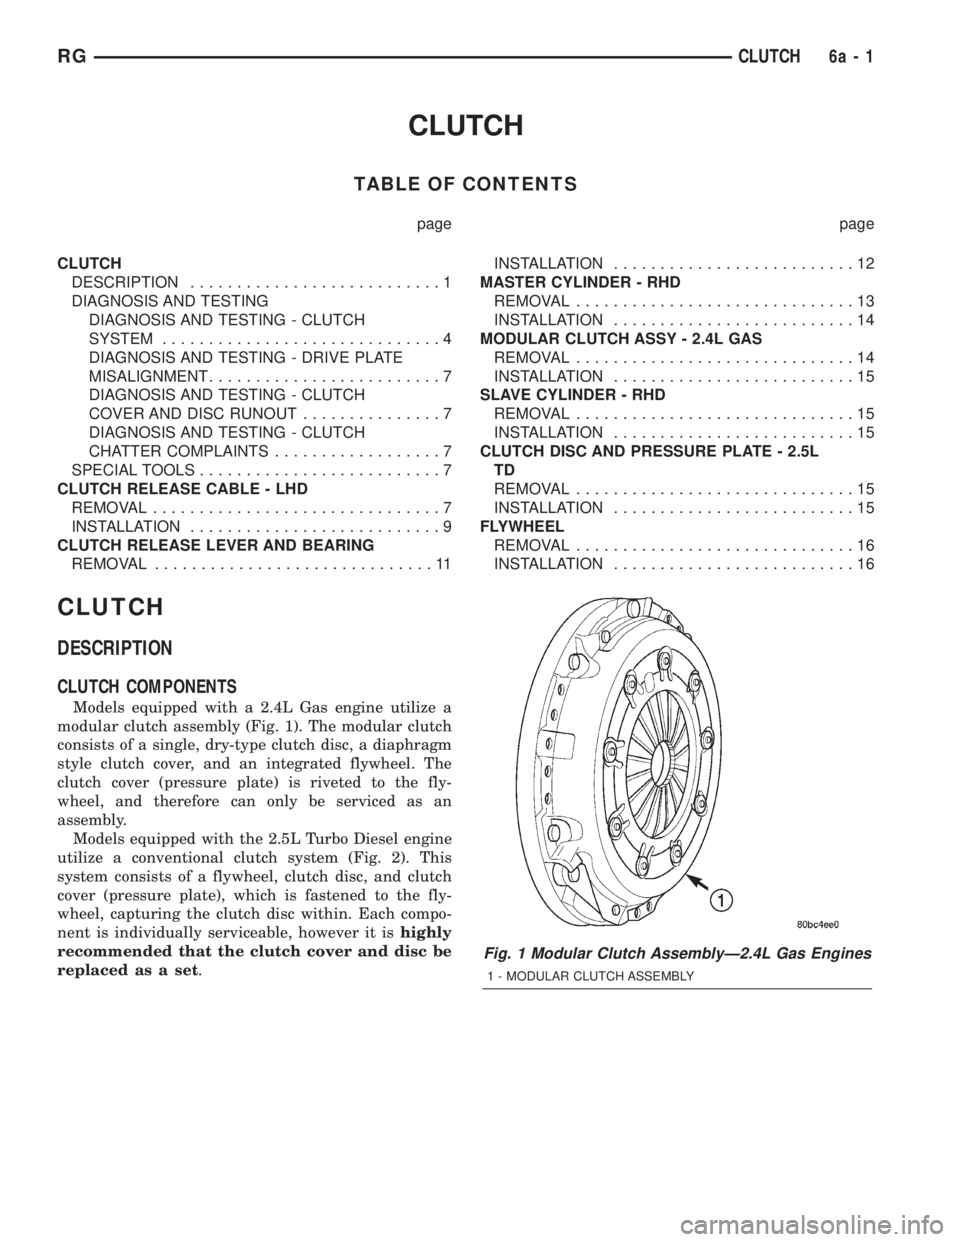 CHRYSLER VOYAGER 2001  Service Manual CLUTCH
TABLE OF CONTENTS
page page
CLUTCH
DESCRIPTION...........................1
DIAGNOSIS AND TESTING
DIAGNOSIS AND TESTING - CLUTCH
SYSTEM..............................4
DIAGNOSIS AND TESTING - DRI